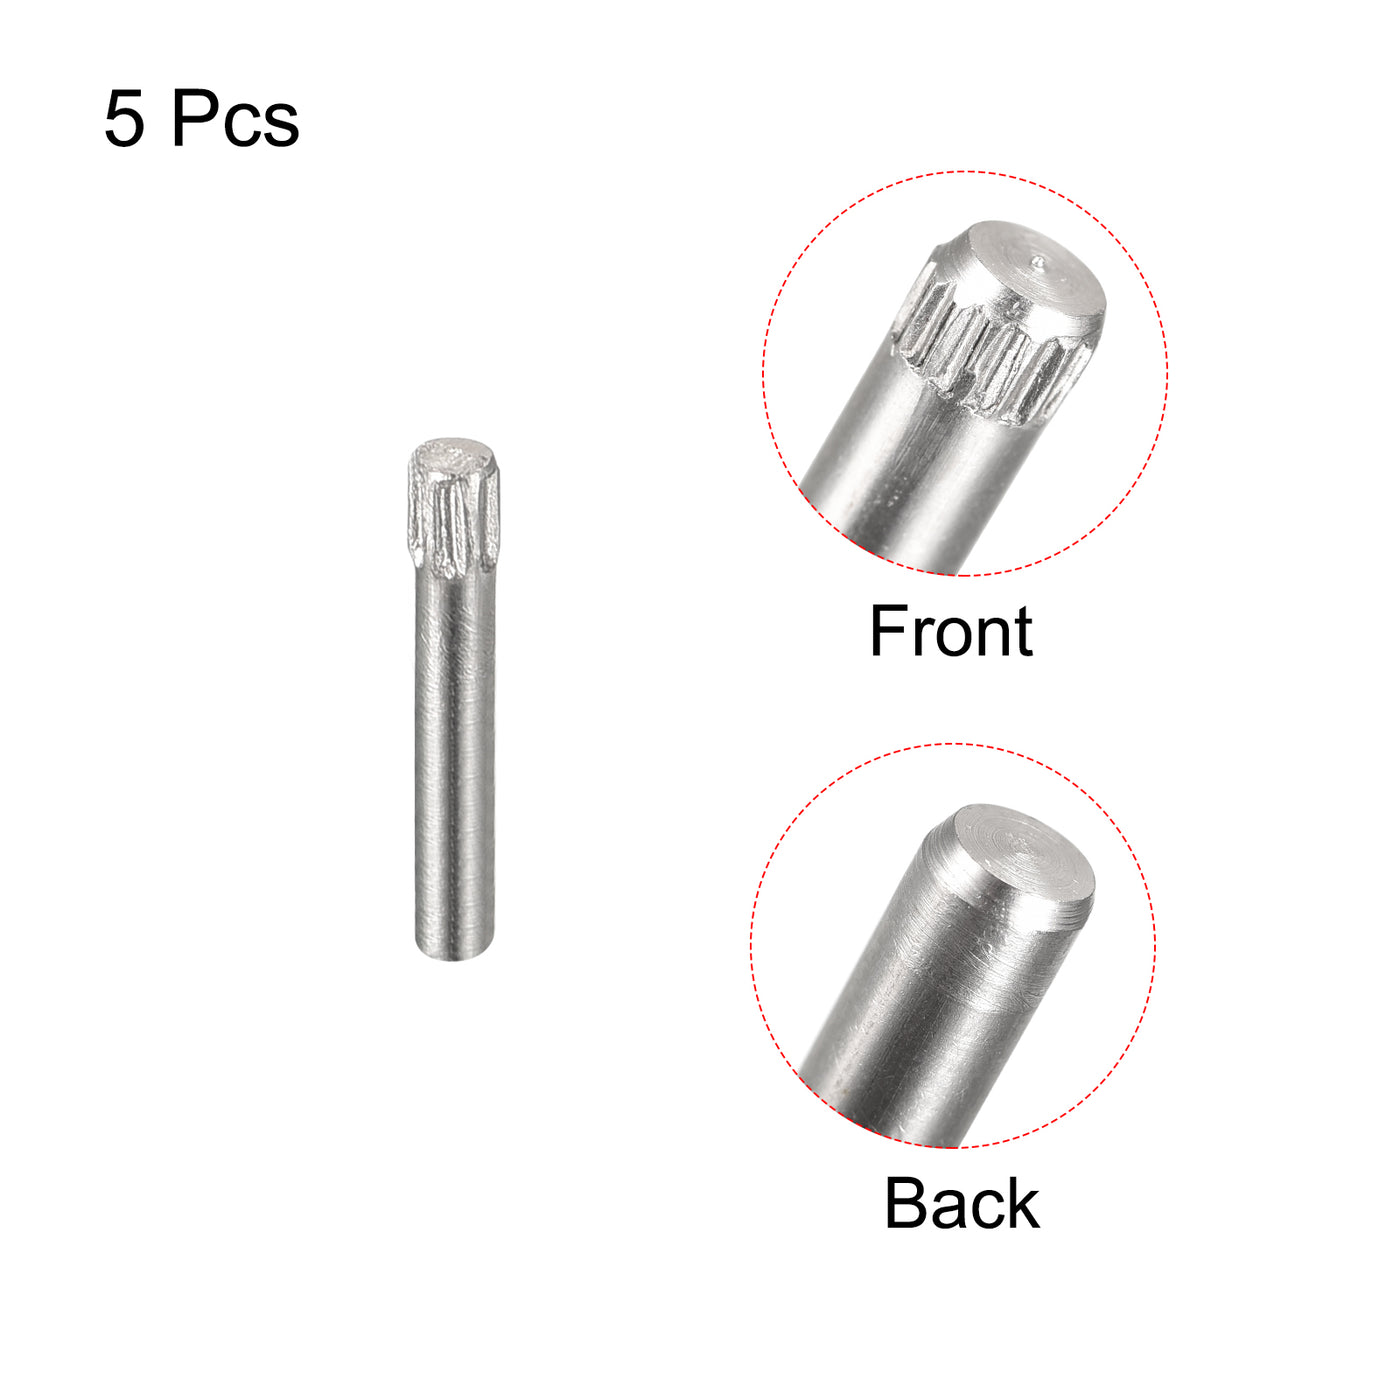 uxcell Uxcell 1.5x10mm 304 Stainless Steel Dowel Pins, 5Pcs Knurled Head Flat End Dowel Pin